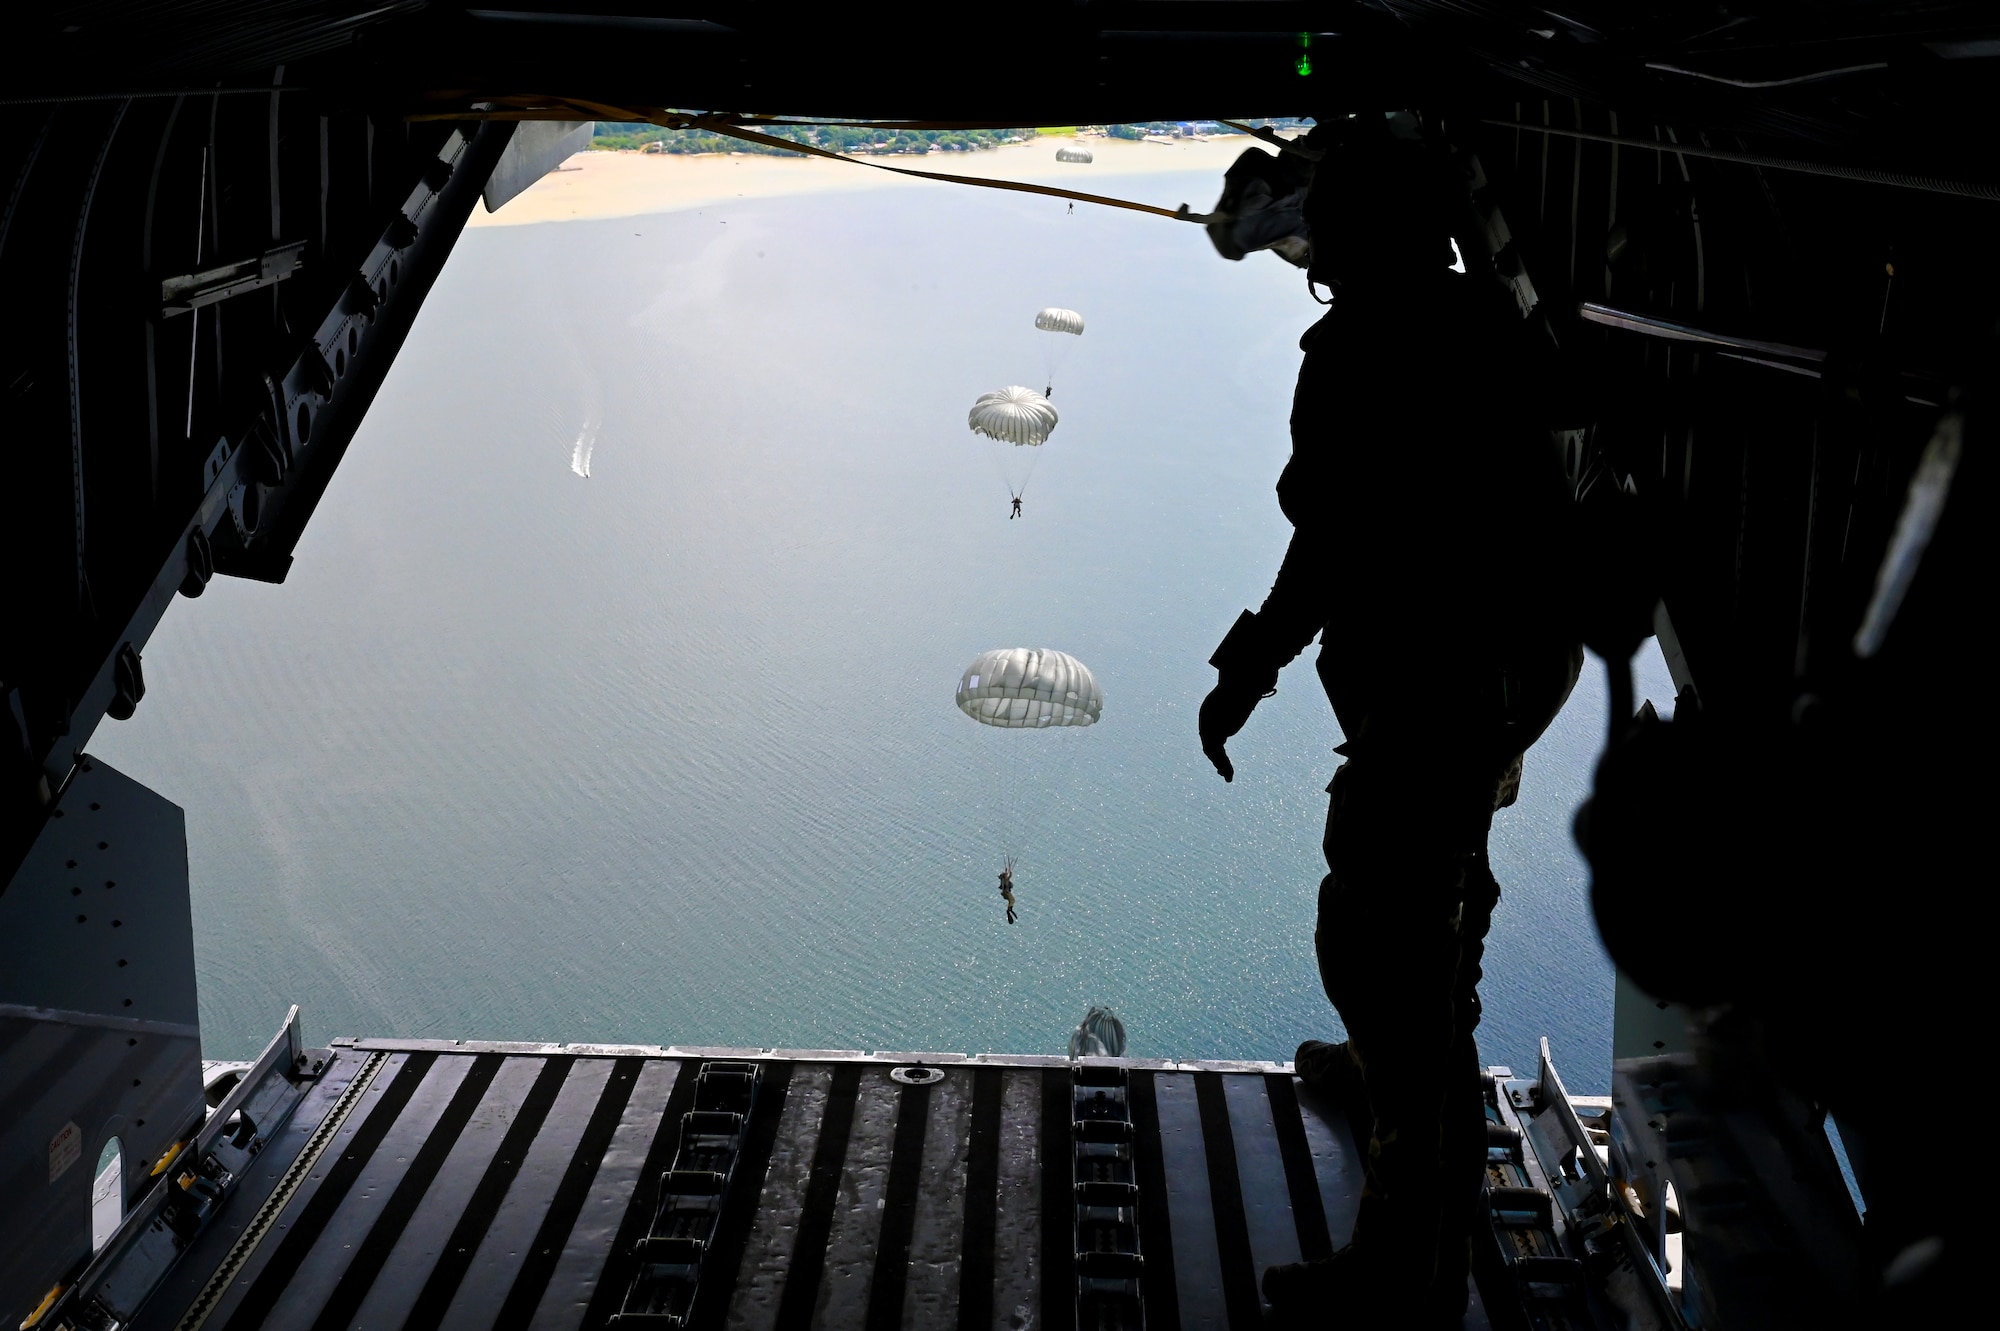 Special Tactics operators from the 24th Special Operations Wing perform a static line jump into the ocean in order to search for and rescue simulated civilian casualties swept to sea by a tsunami Sept. 6, 2021,